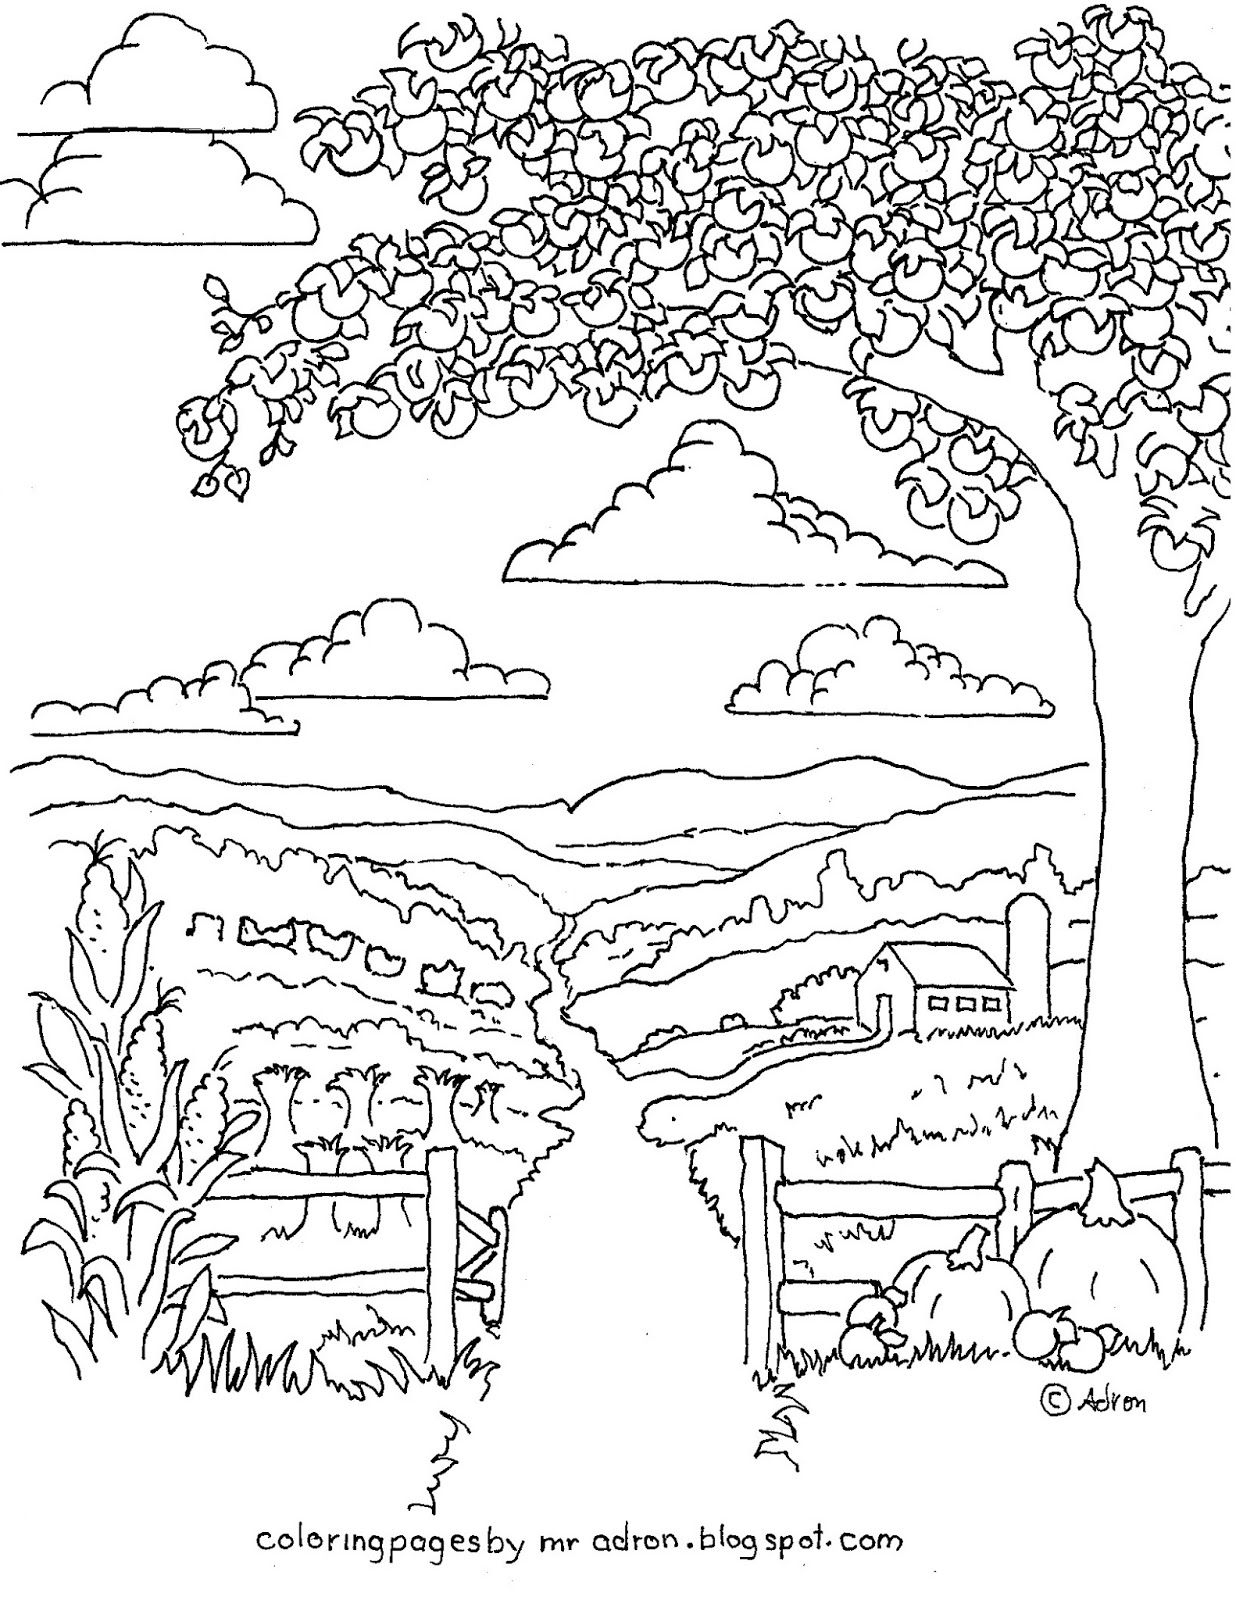 Coloring Pages For Kidsmr. Adron: Printable Autumn Harvest - Free Printable Fall Harvest Coloring Pages